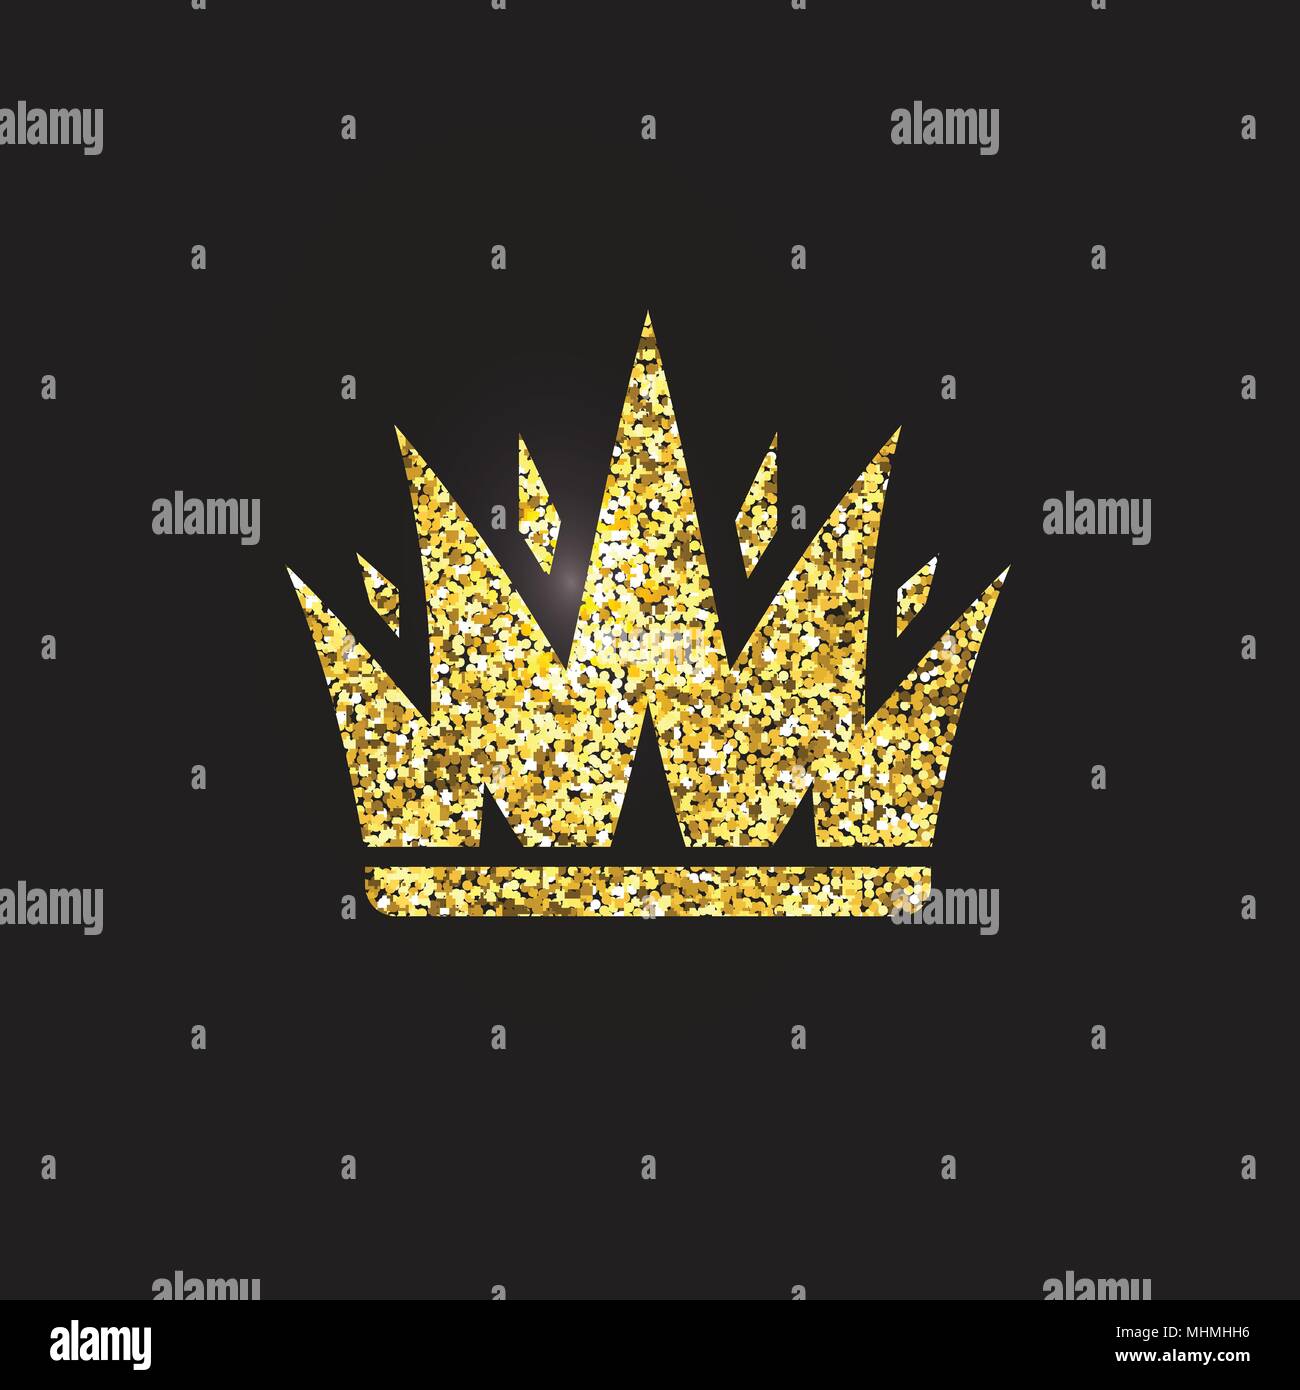 Queen crown, royal gold headdress. King golden accessory. Isolated vector illustrations. Elite class symbol on black background. Stock Vector